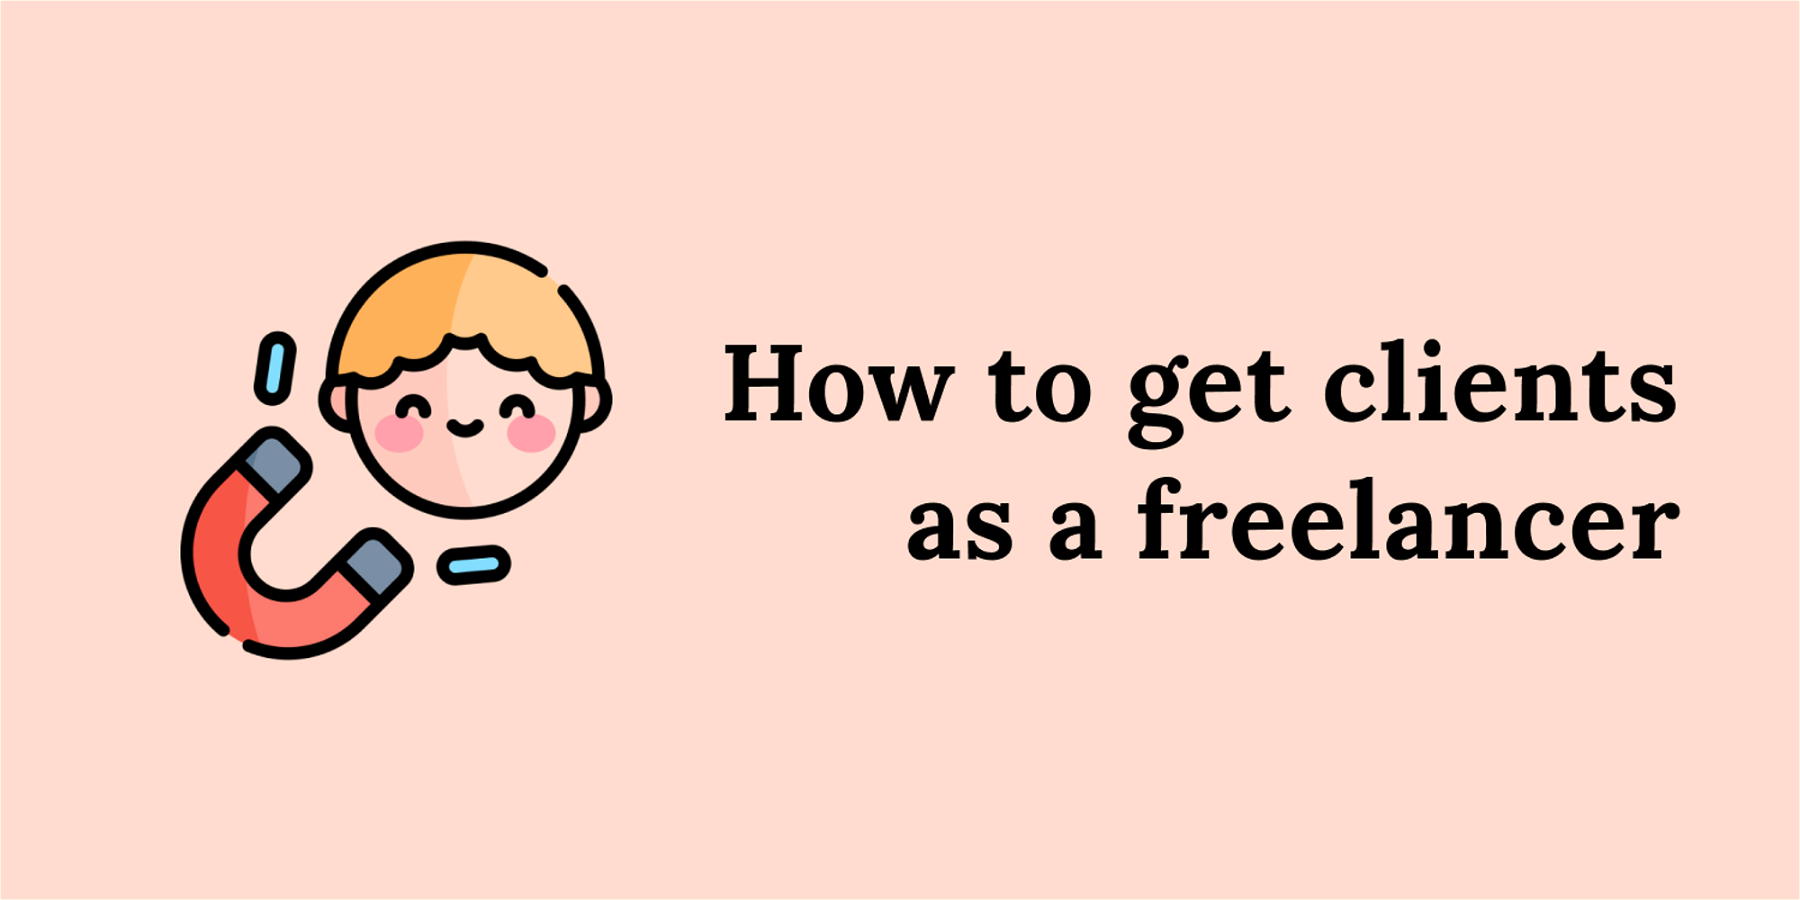 How to get clients as a freelancer. 9 strategies to follow